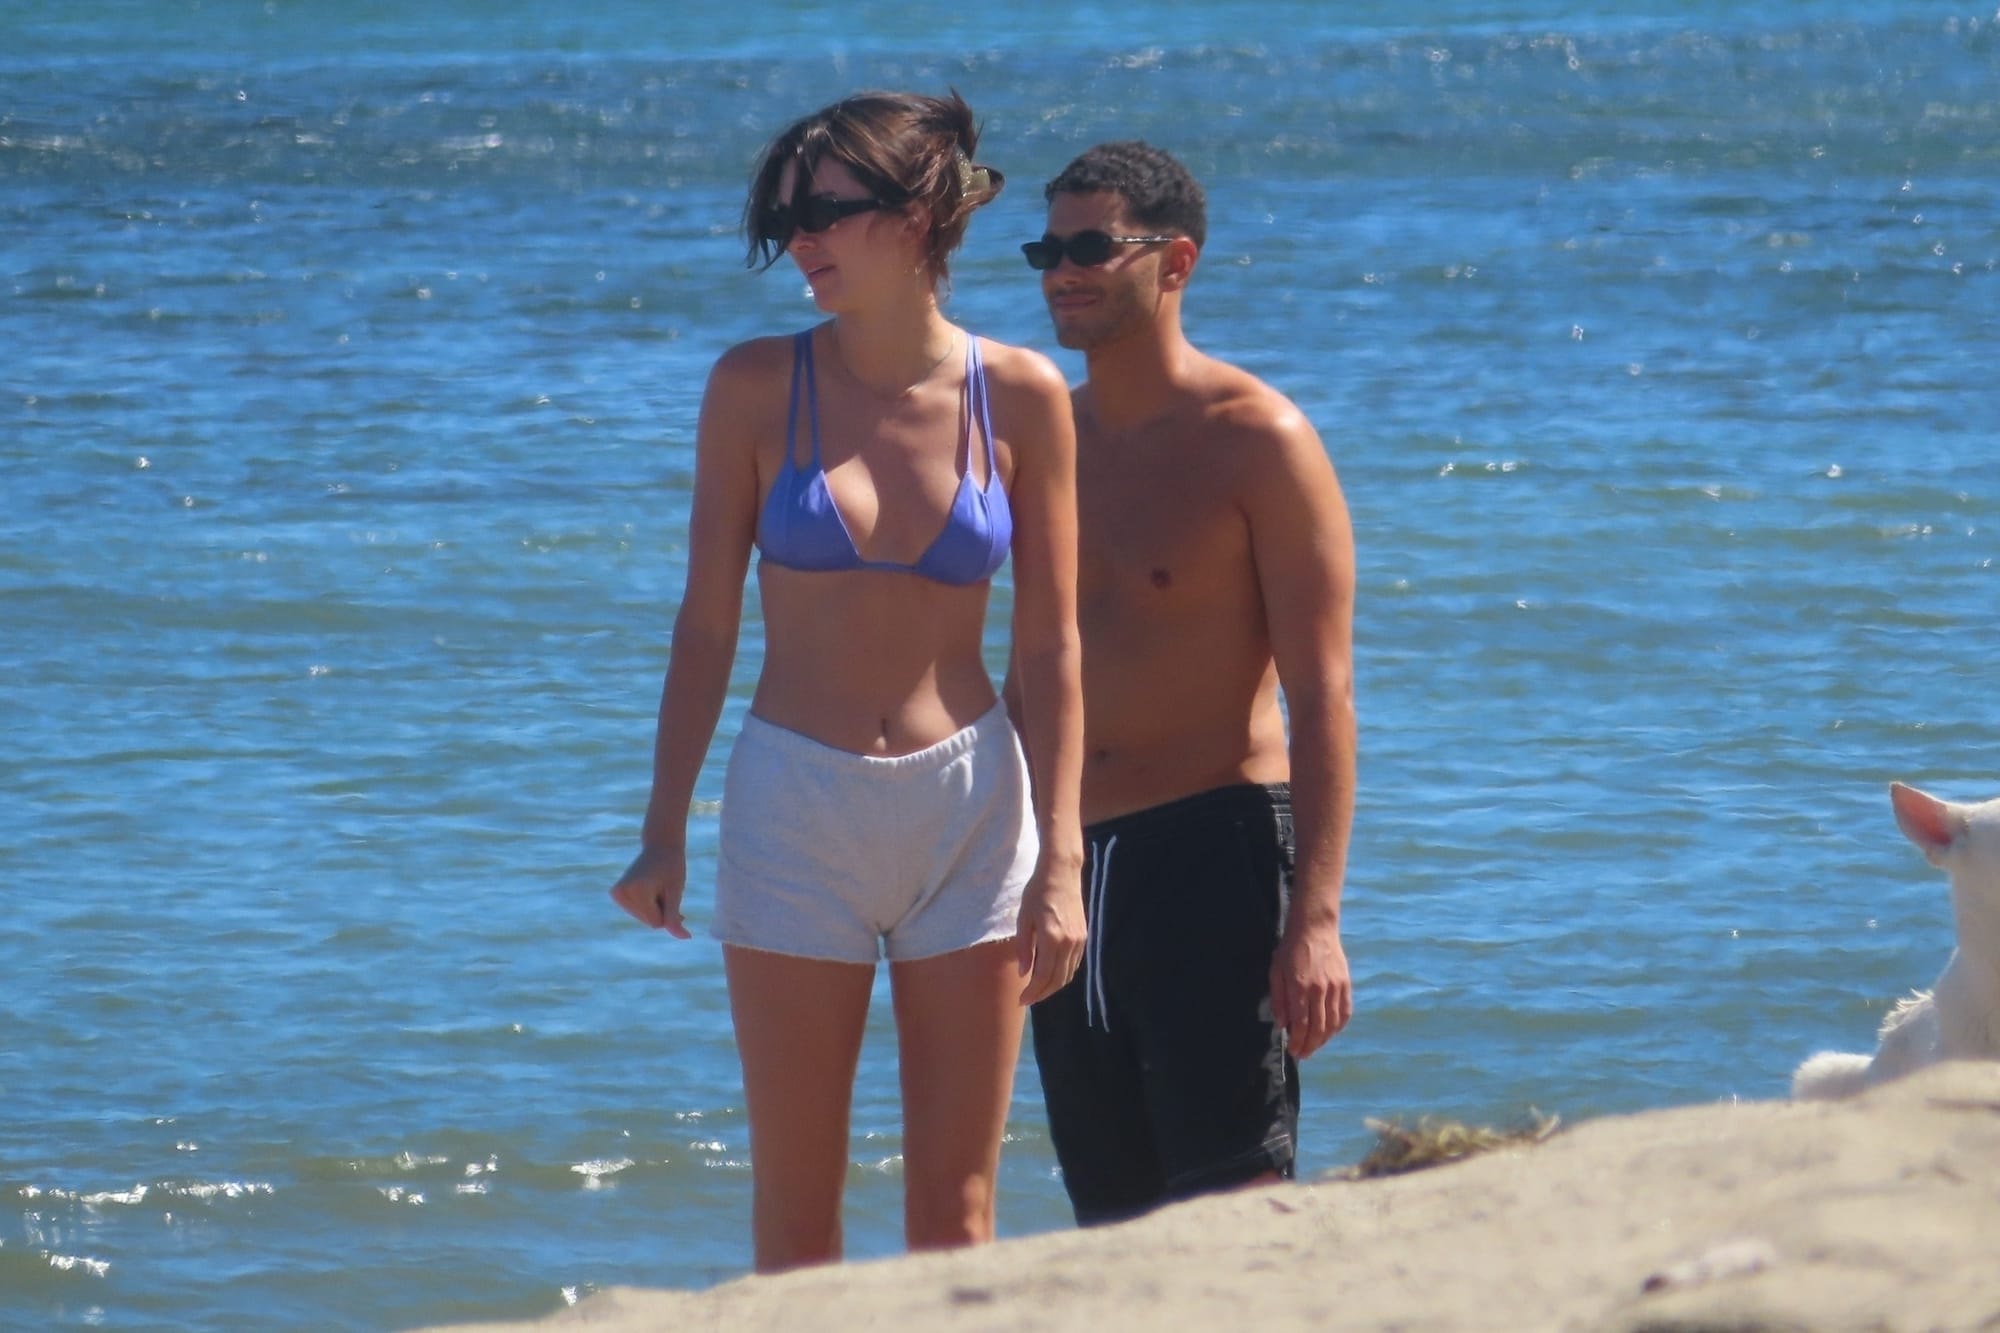 Kendall Jenner in a tiny blue bikini top with her shirtless friend Fai Khadra at the beach in Malibu on June 19, 2022.